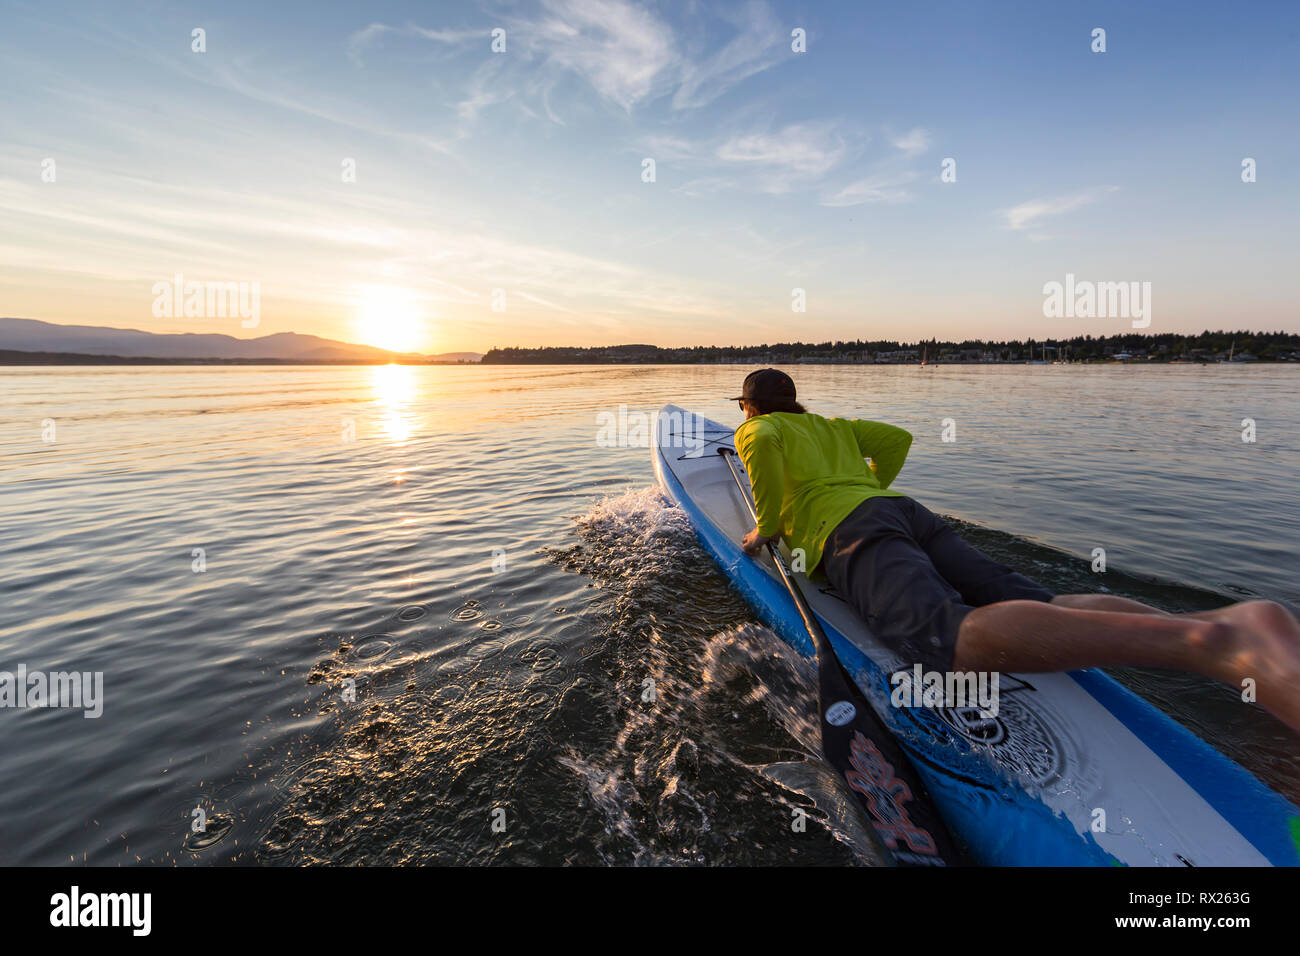 A stand up paddleboarder launches his board into the evening waters of Comox Bay,  The Comox Valley, Vancouver Island, British Columbia, Canada Stock Photo